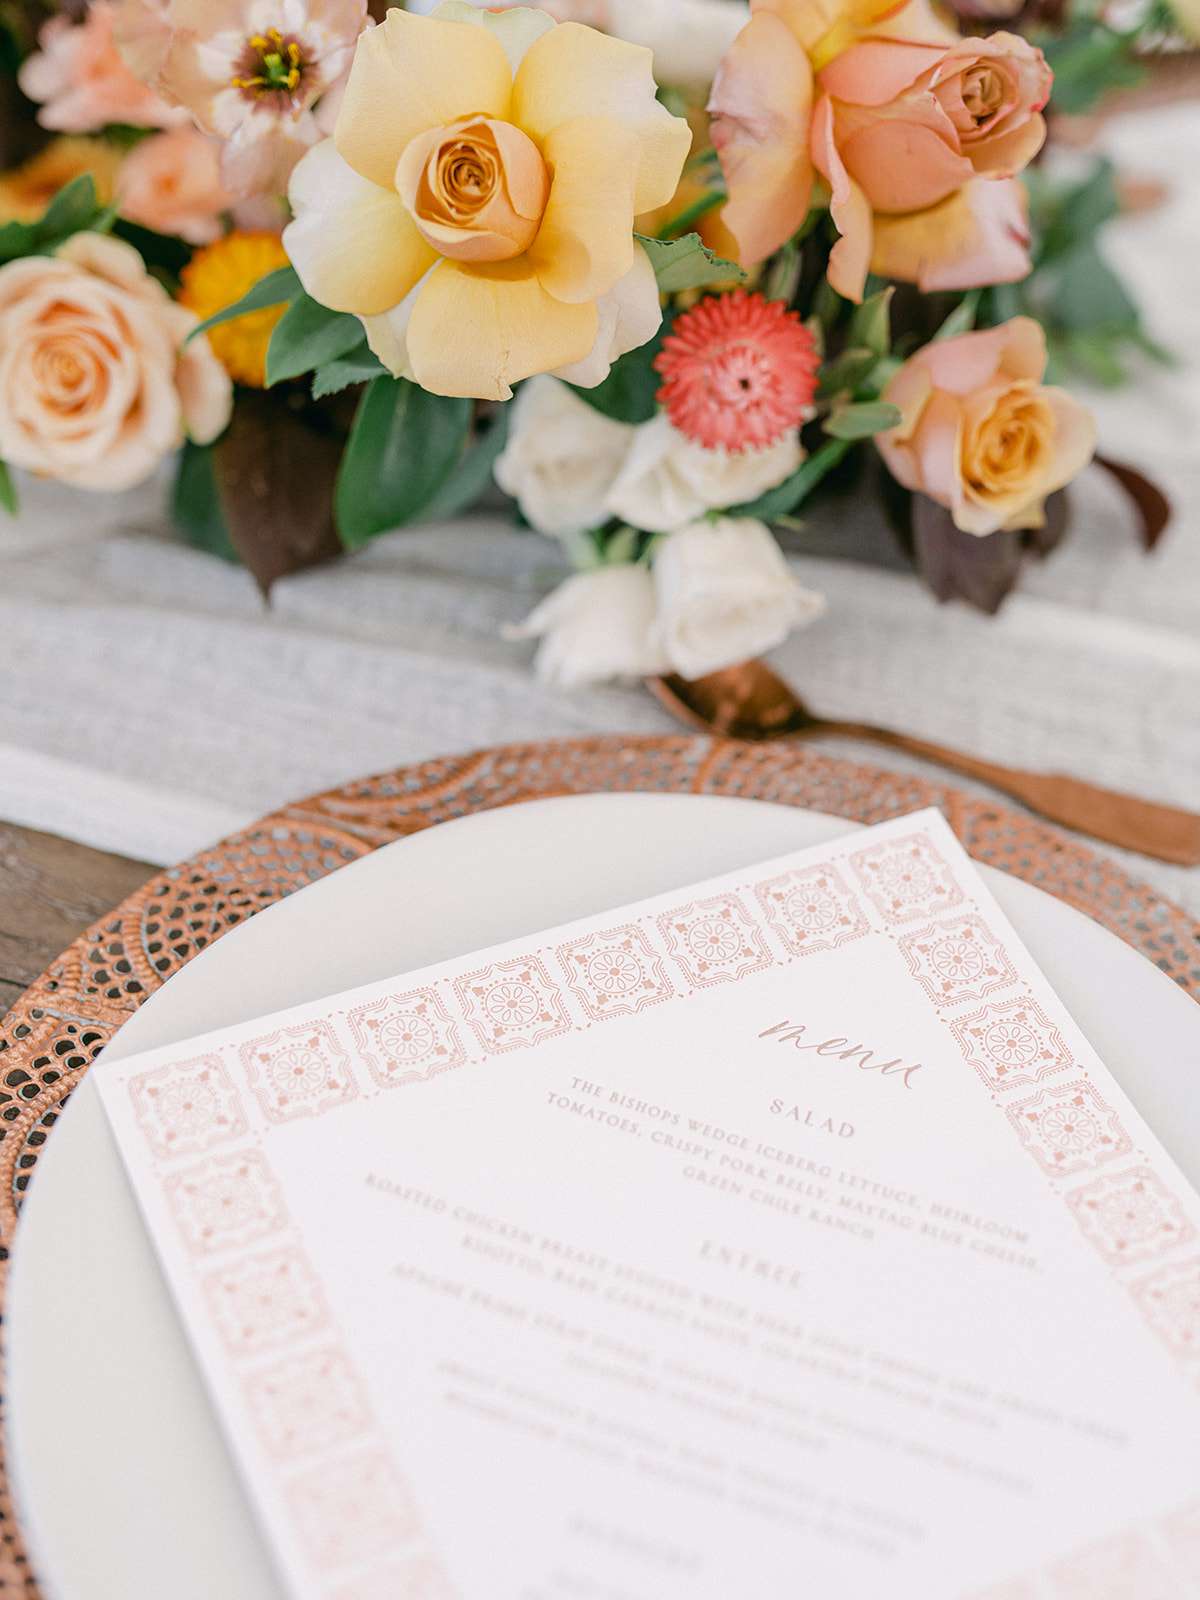 wedding reception place setting with natural chargers and tile-inspired menus